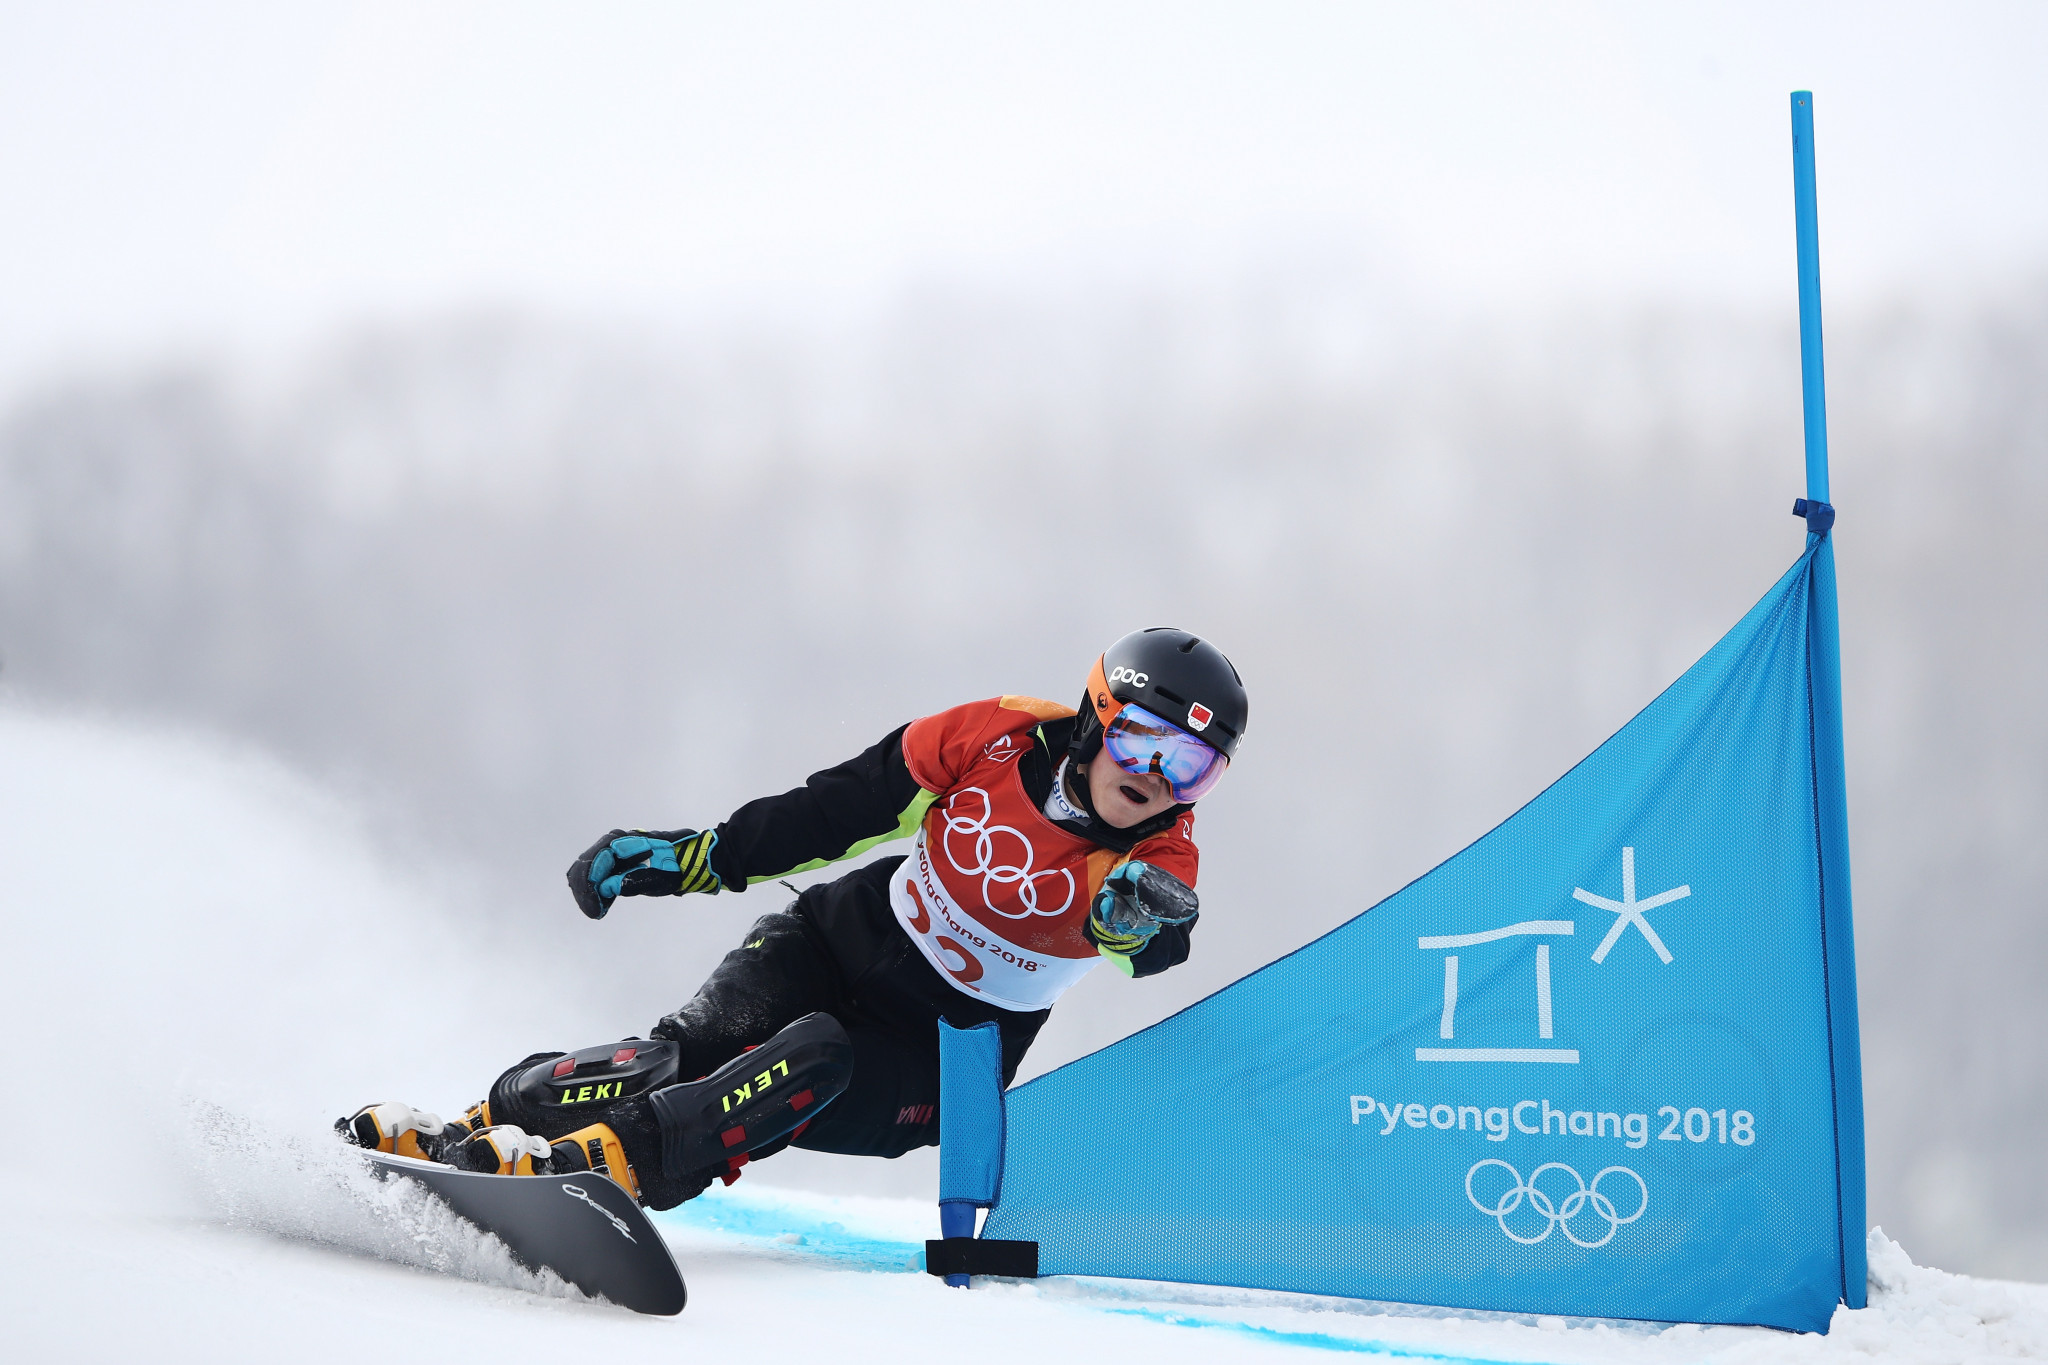 Gong hands hosts early Beijing 2022 boost with maiden FIS Alpine Snowboard World Cup victory in Chongli